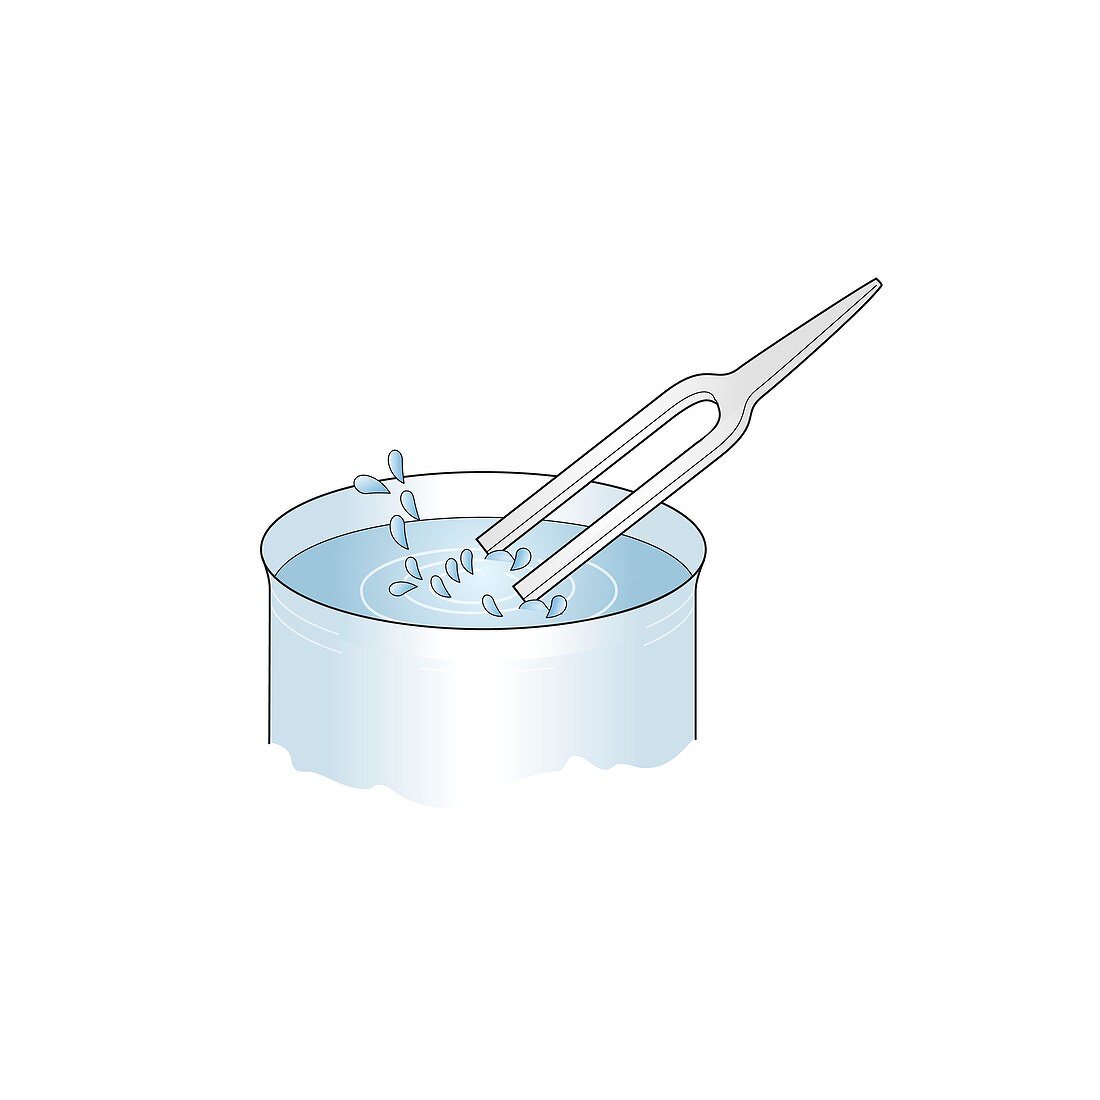 Tuning fork vibrations in water, illustration